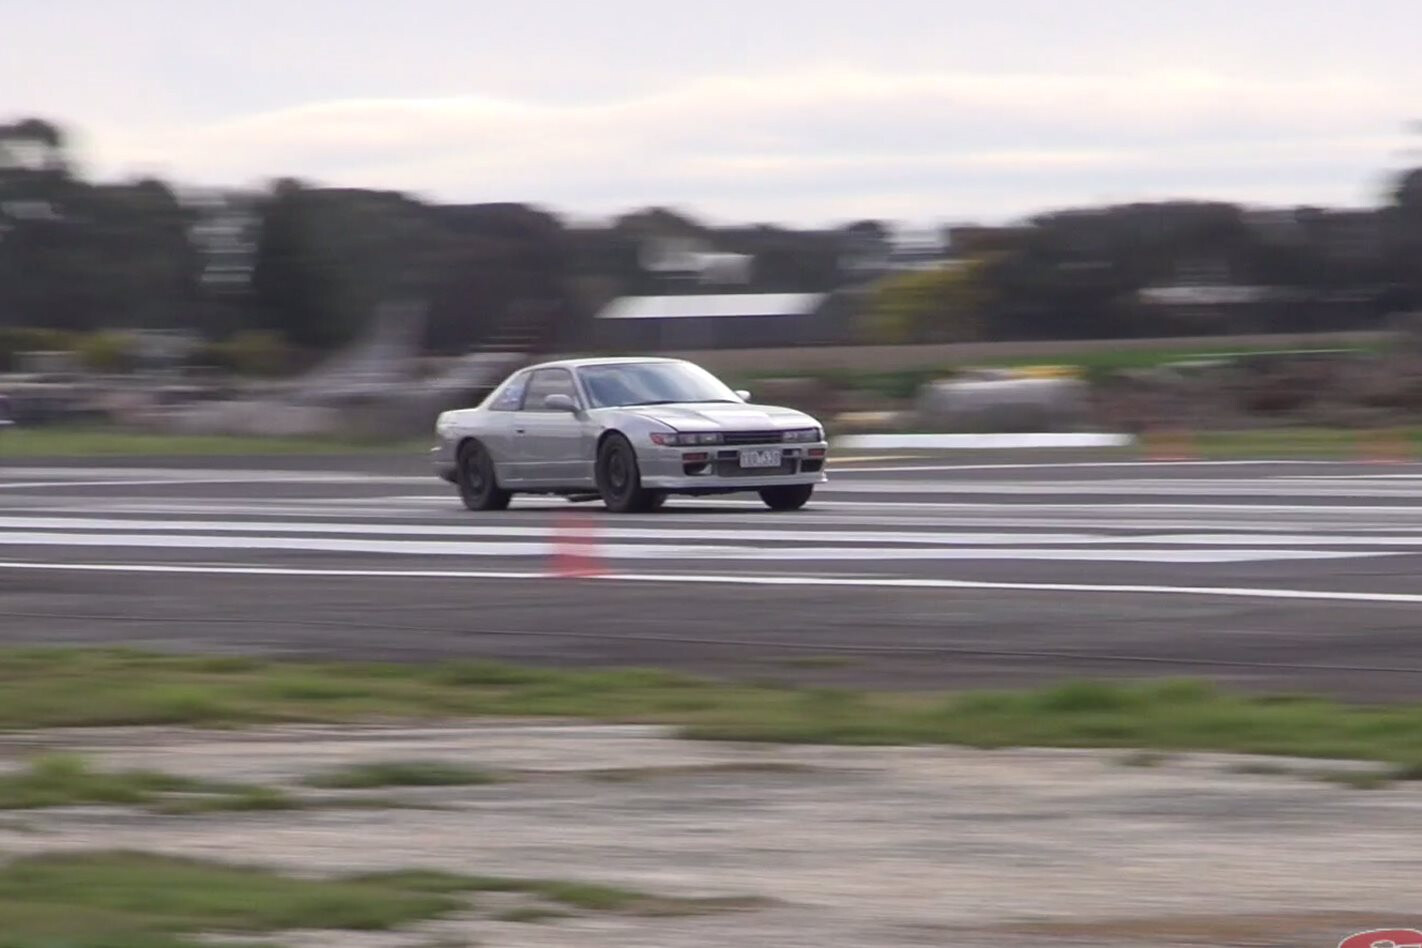 ALL-WHEEL-DRIVE RB-POWERED NISSAN SILVIA WINS KING OF THE STREET – VIDEO